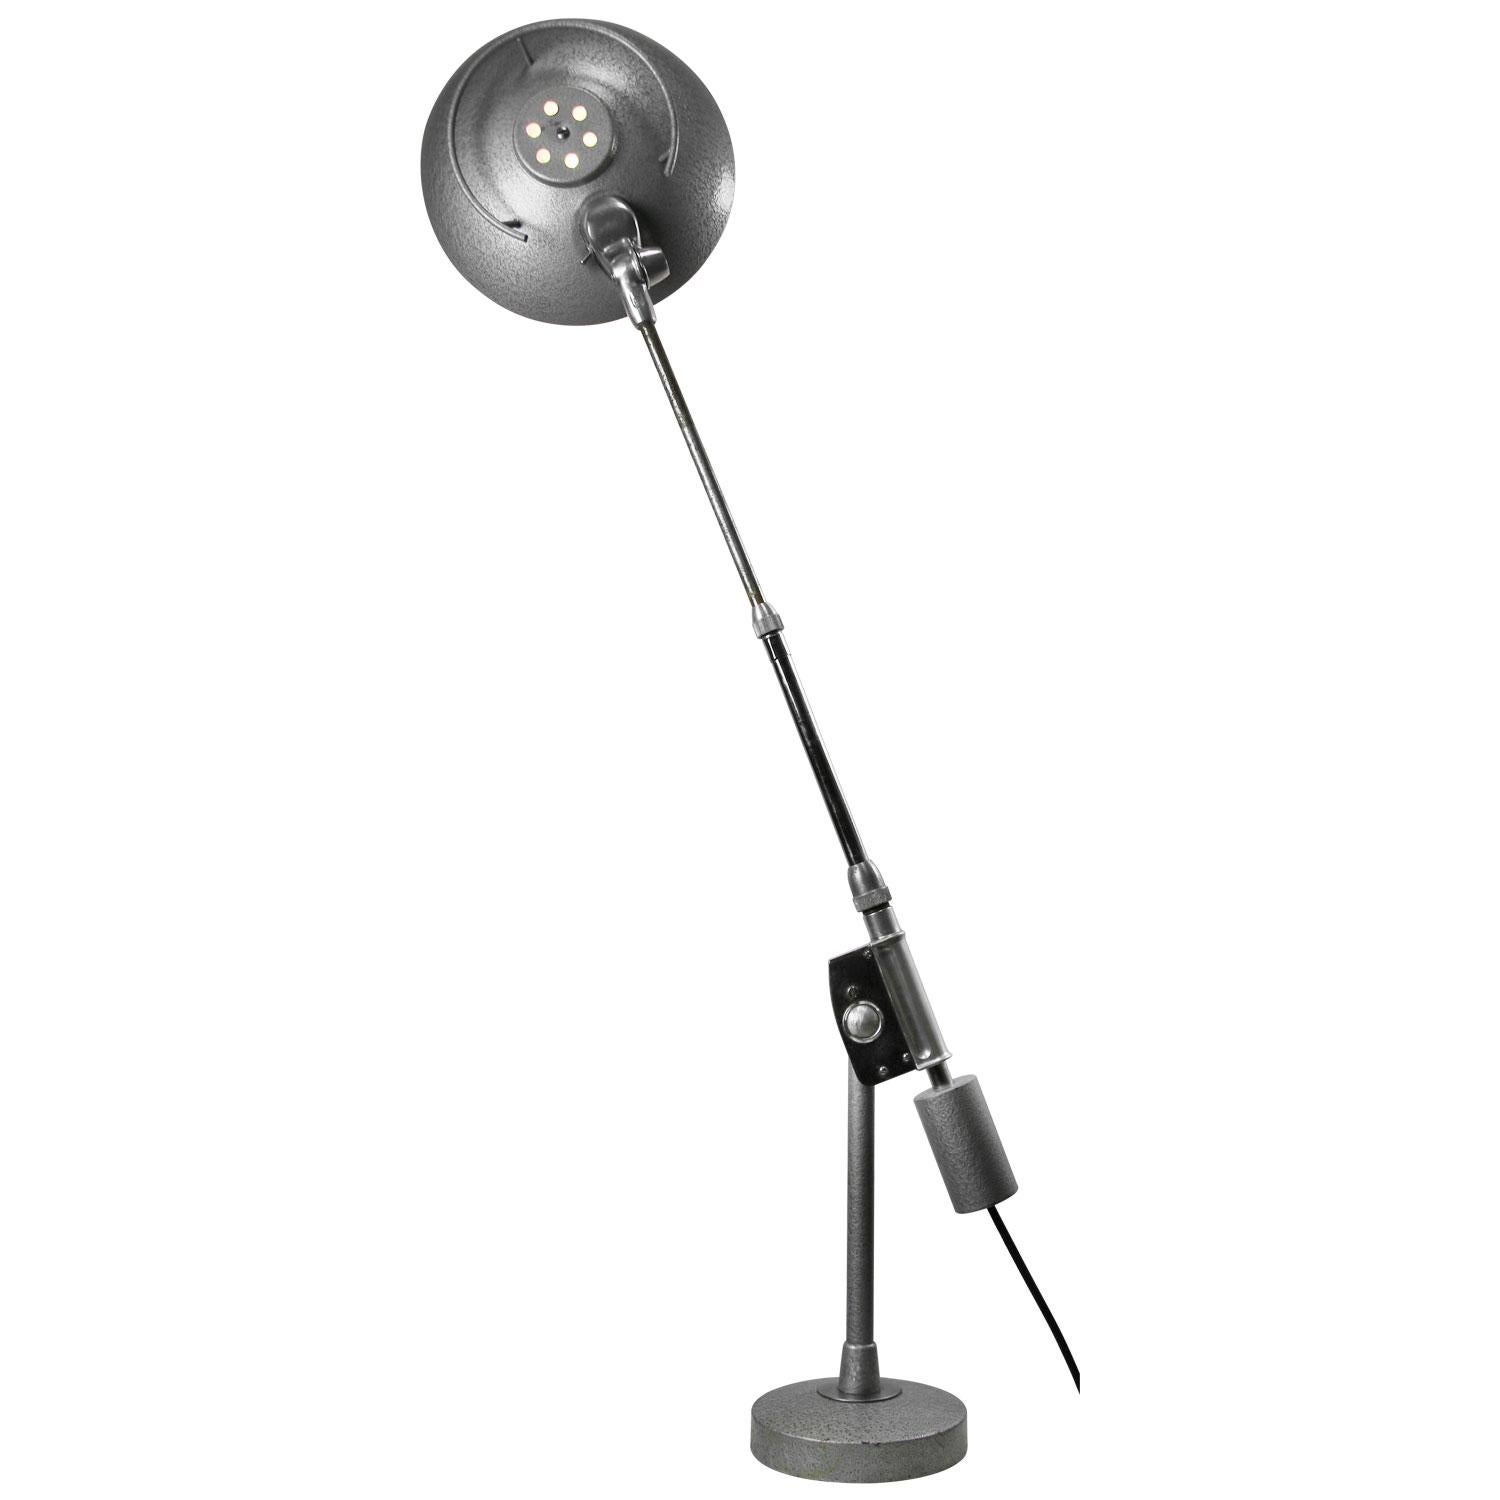 Iron Architect table desk light by Ferdinand Solère for SOLR no. 202